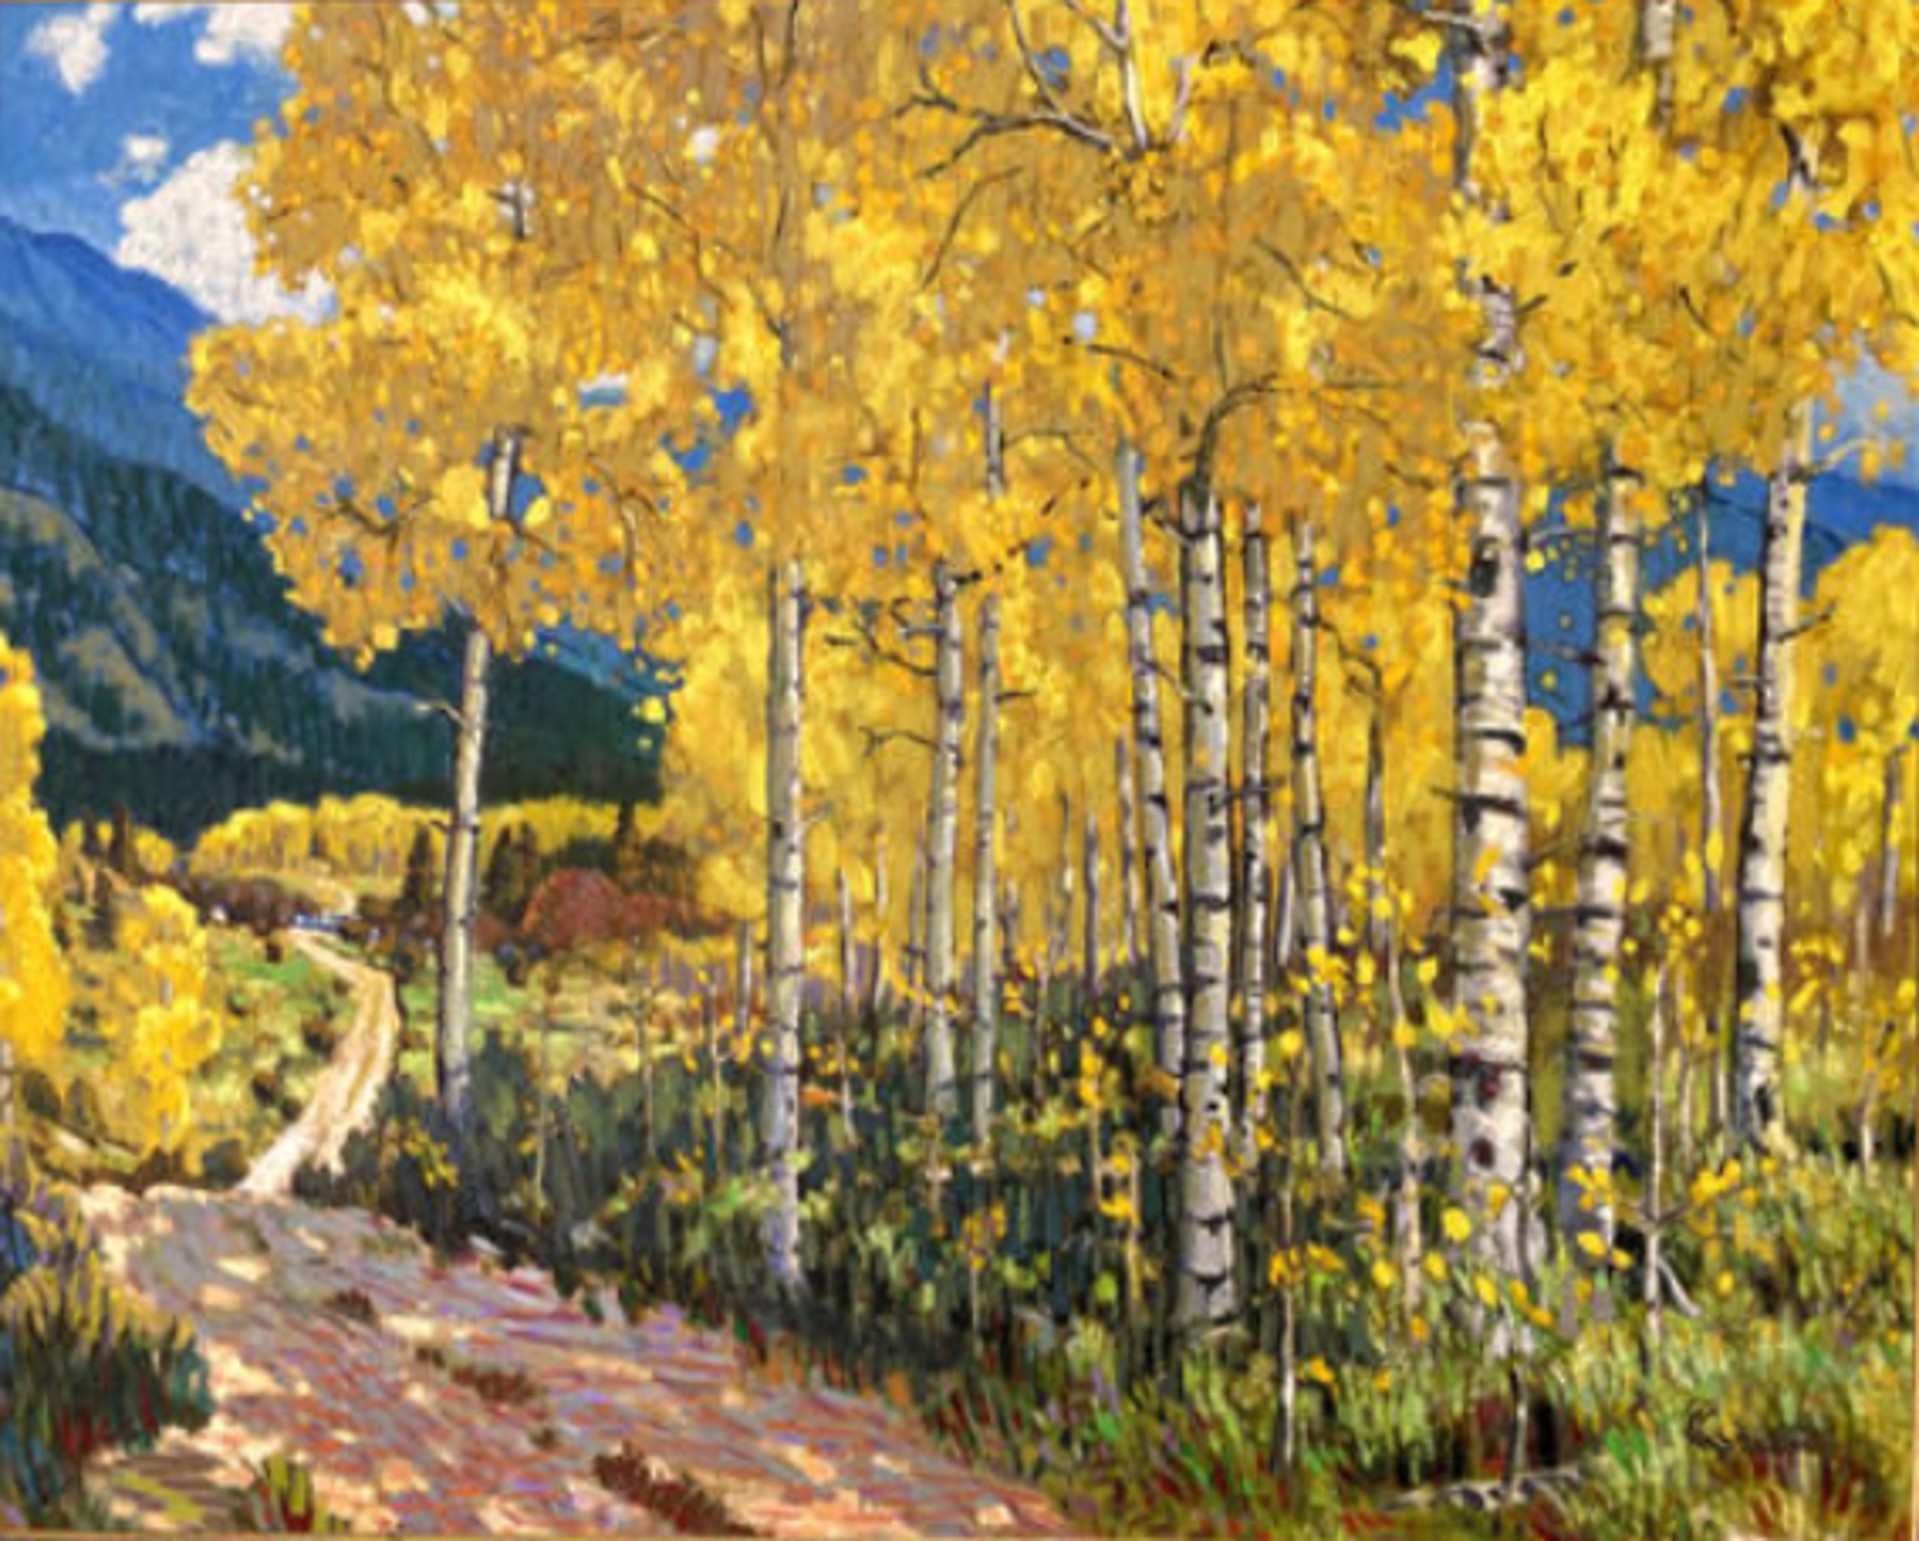 Warm Light of Autumn by Kenneth Green